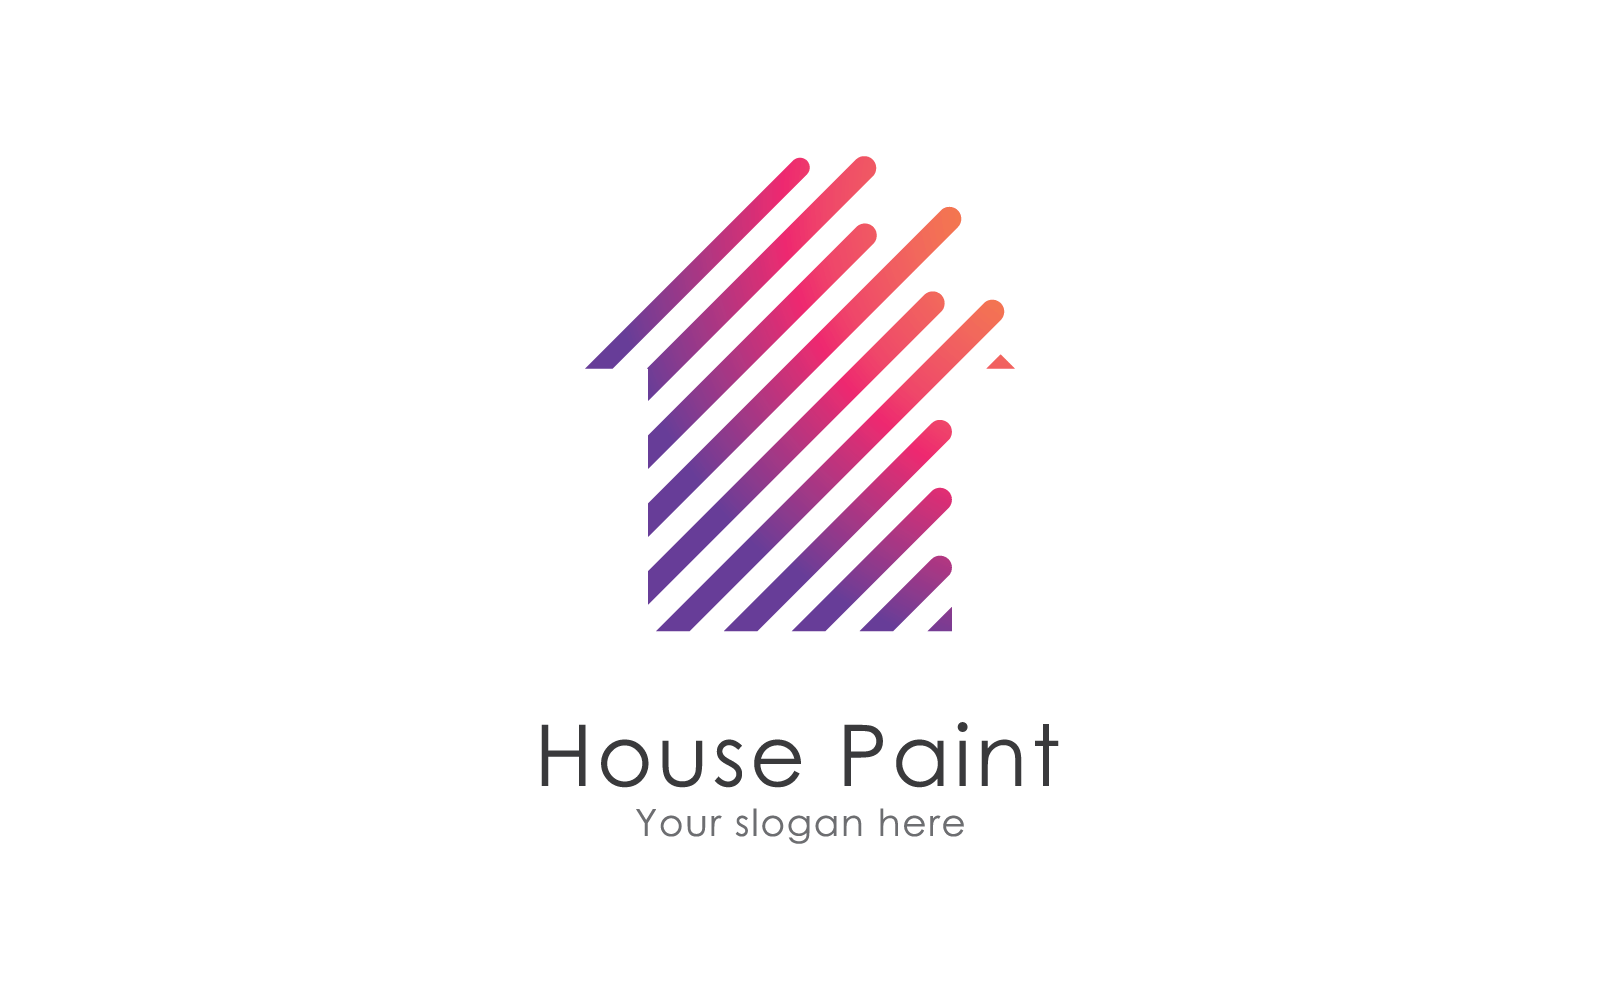 Paint House logo icon business vector design template